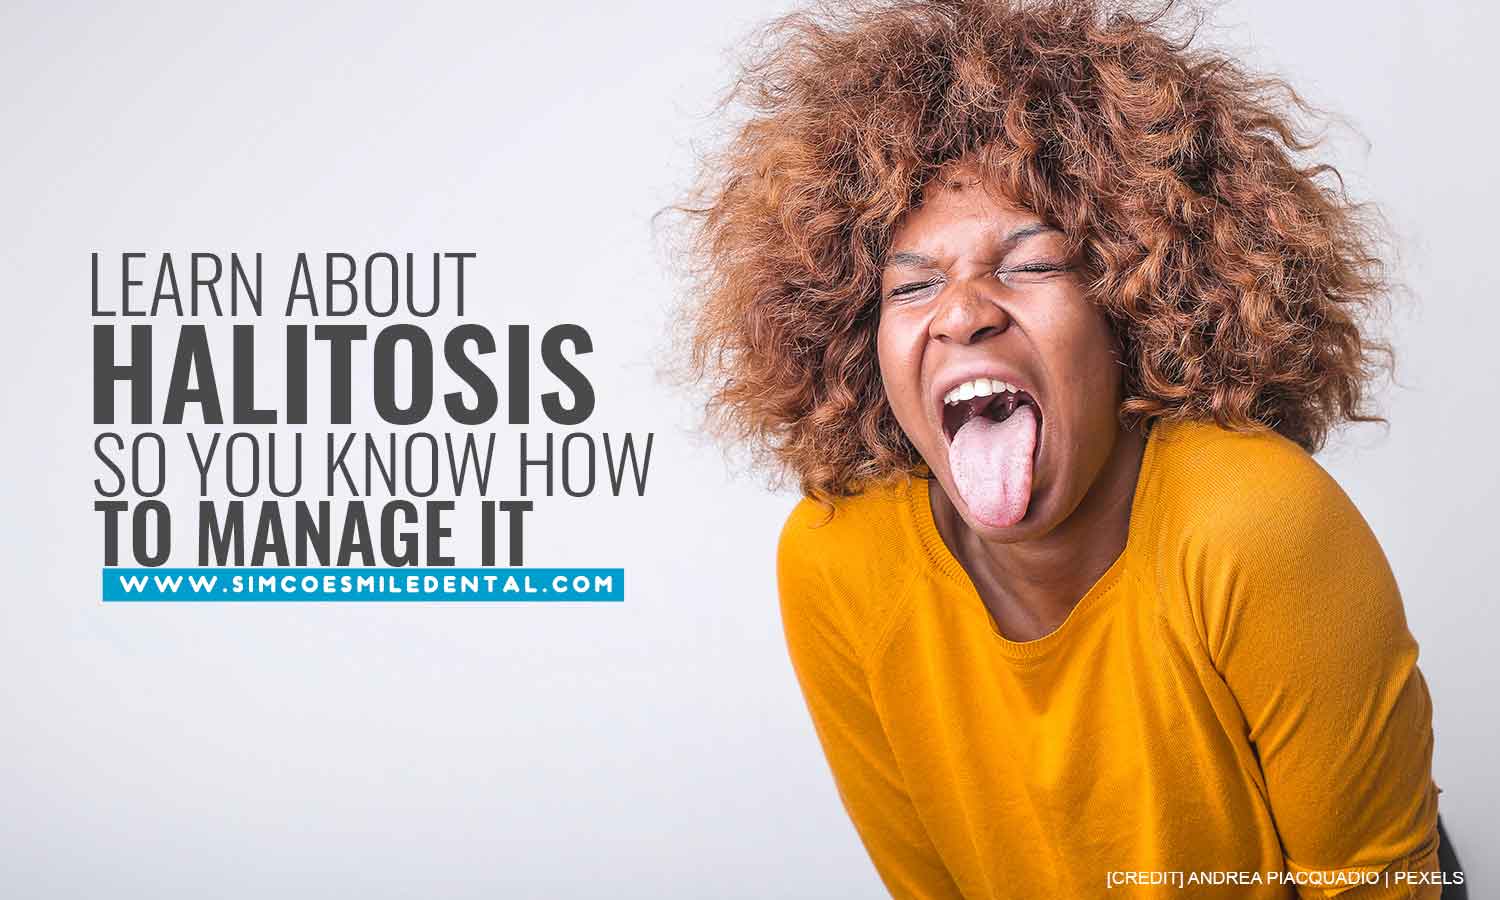 Learn about halitosis so you know how to manage it